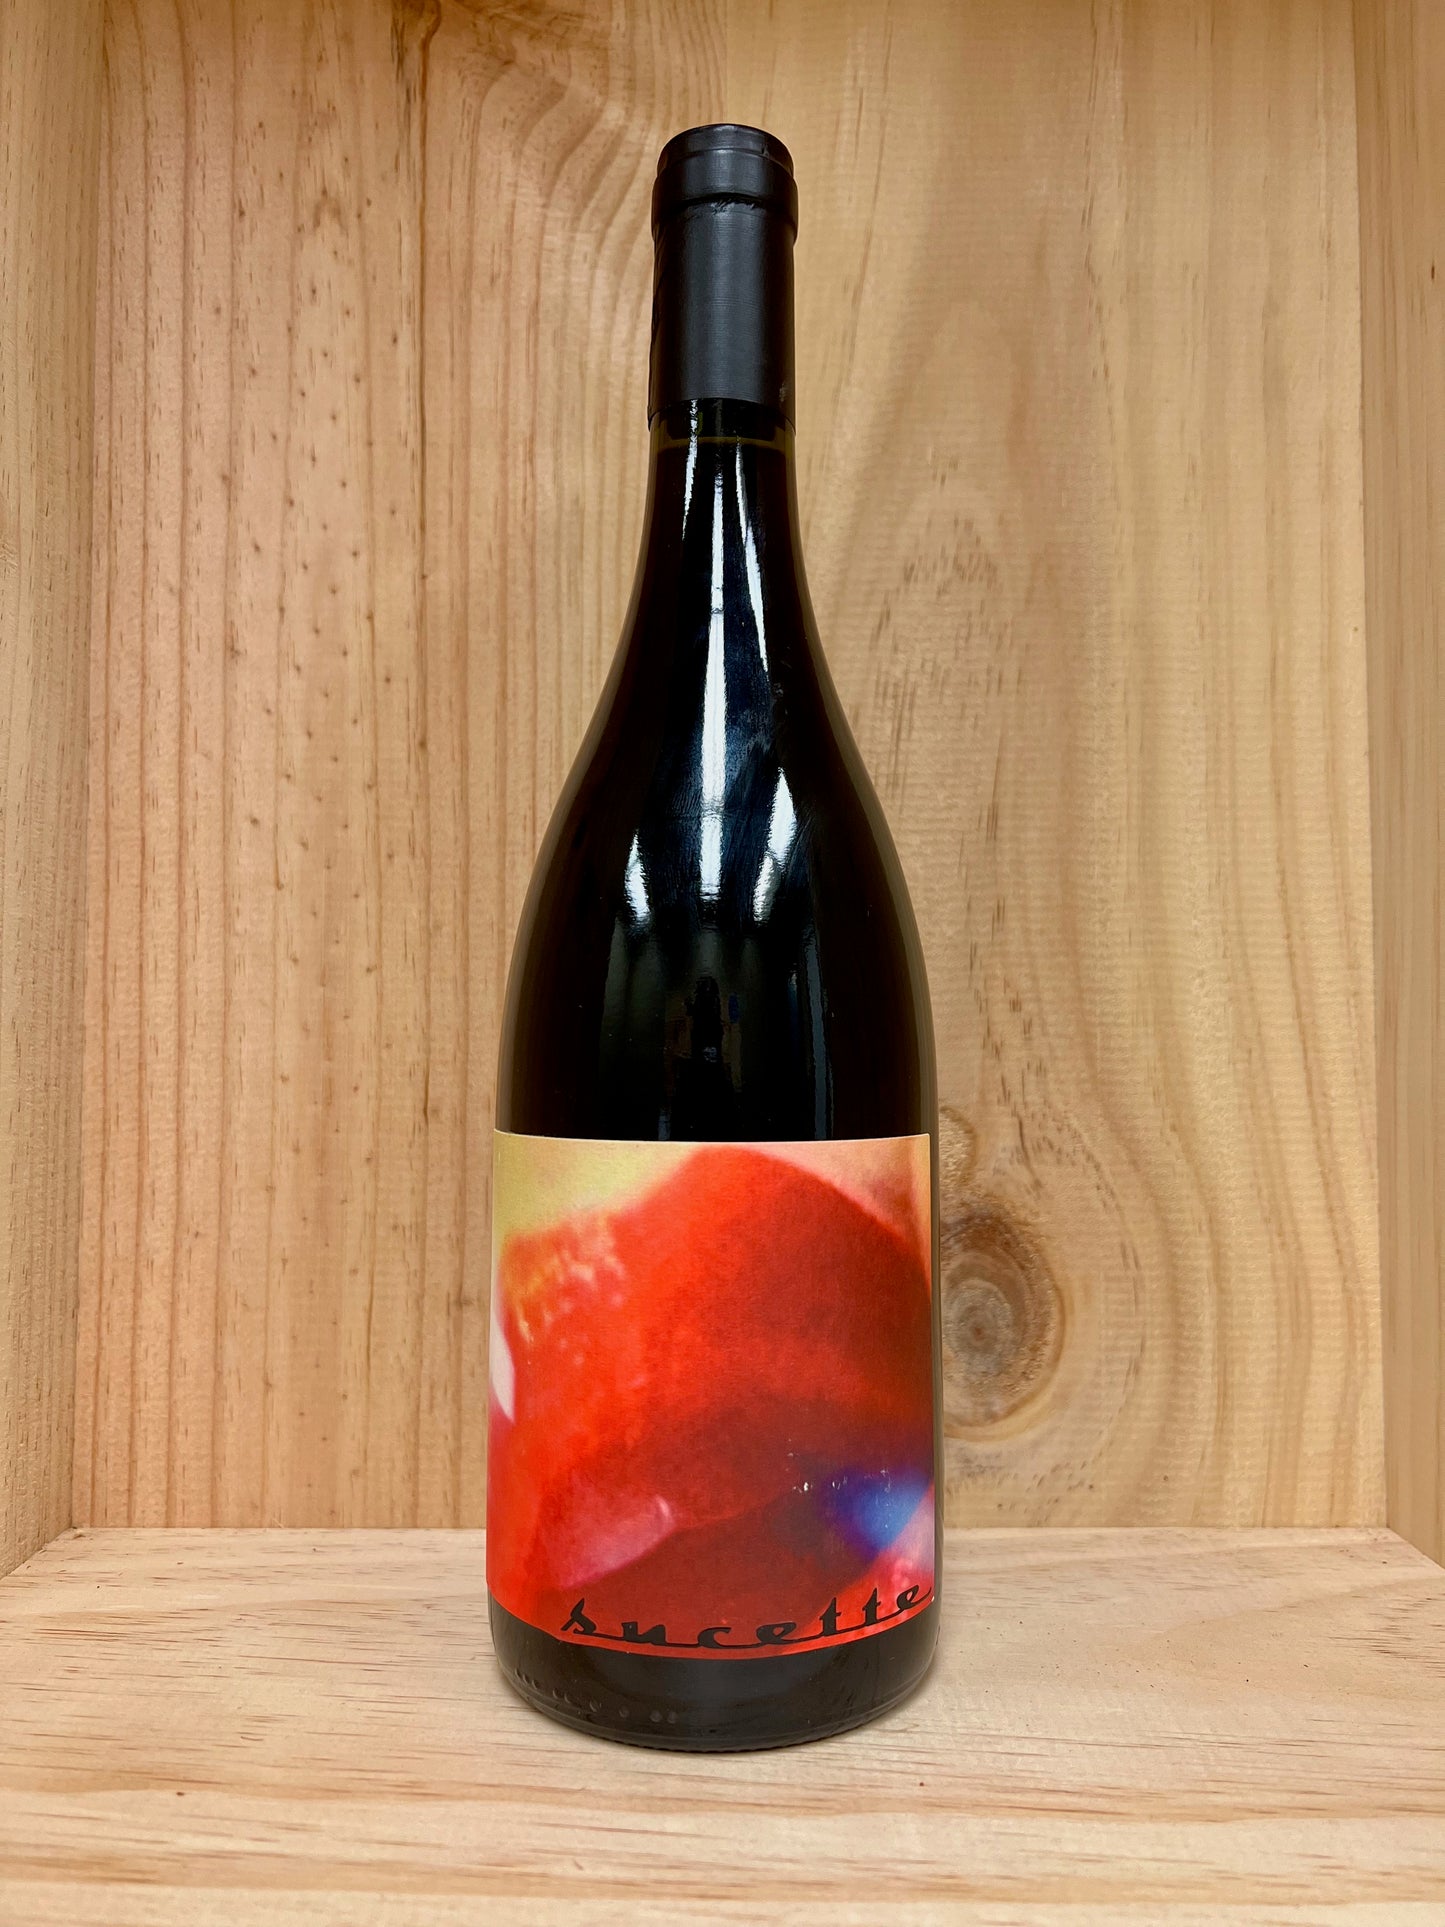 An Approach to Relaxation, ‘Sucette’ Grenache 2017